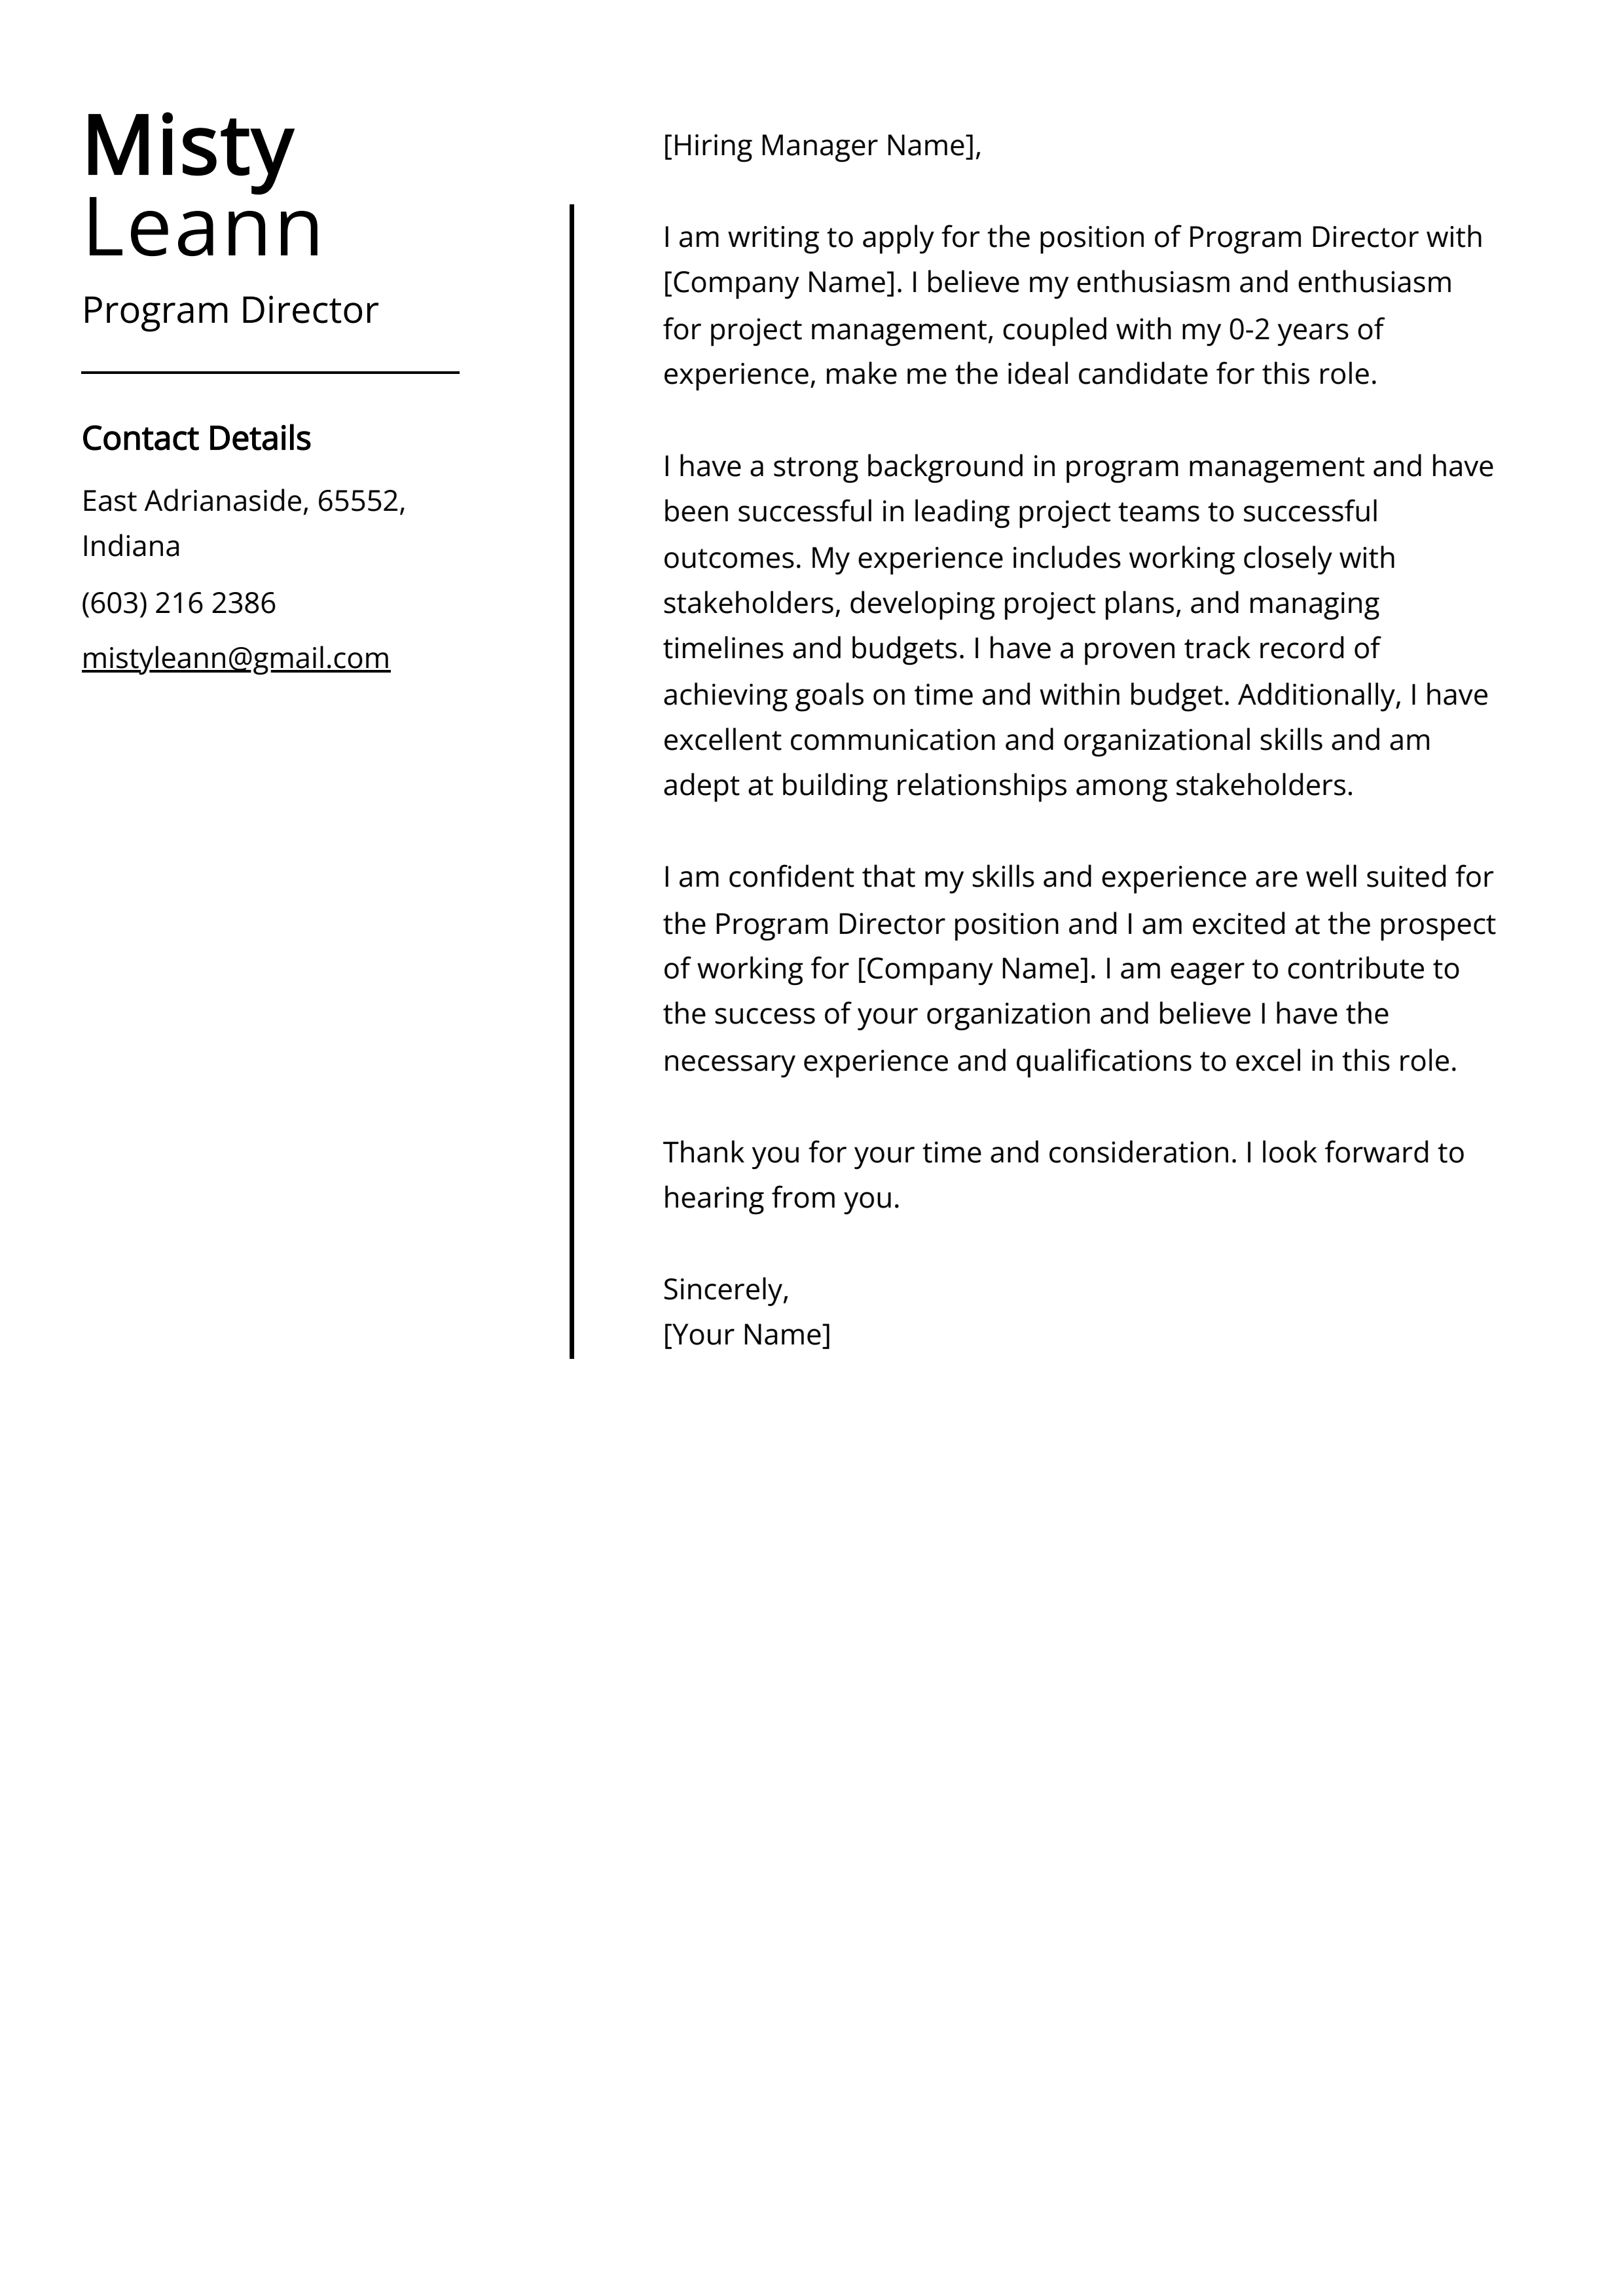 Program Director Cover Letter Example